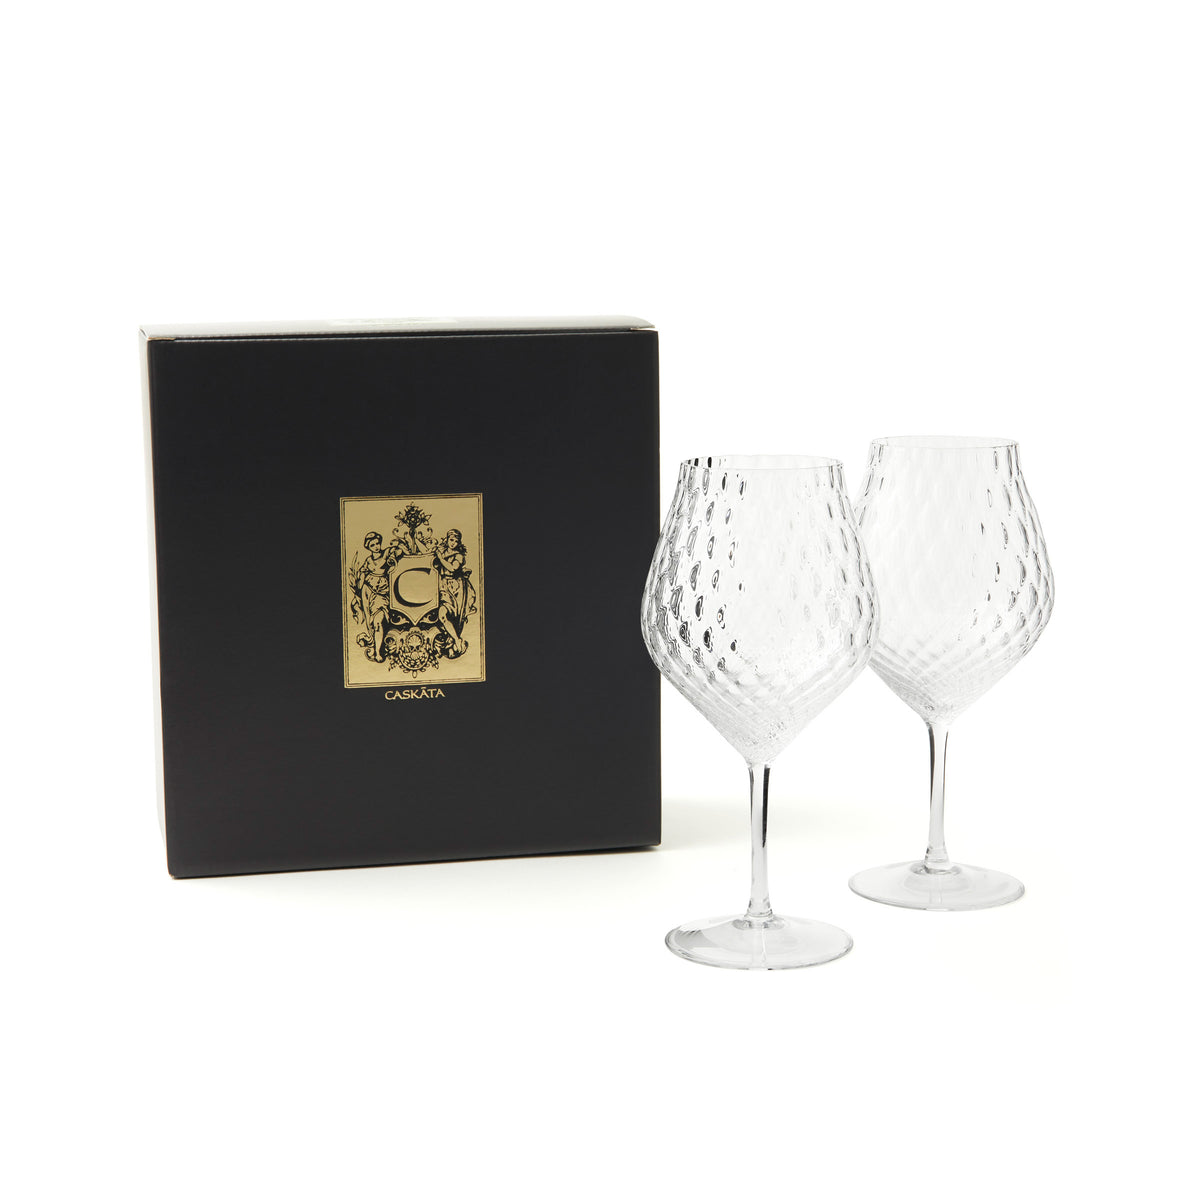 Phoebe clear mouth-blown optic crystal universal wine glasses from Caskata.